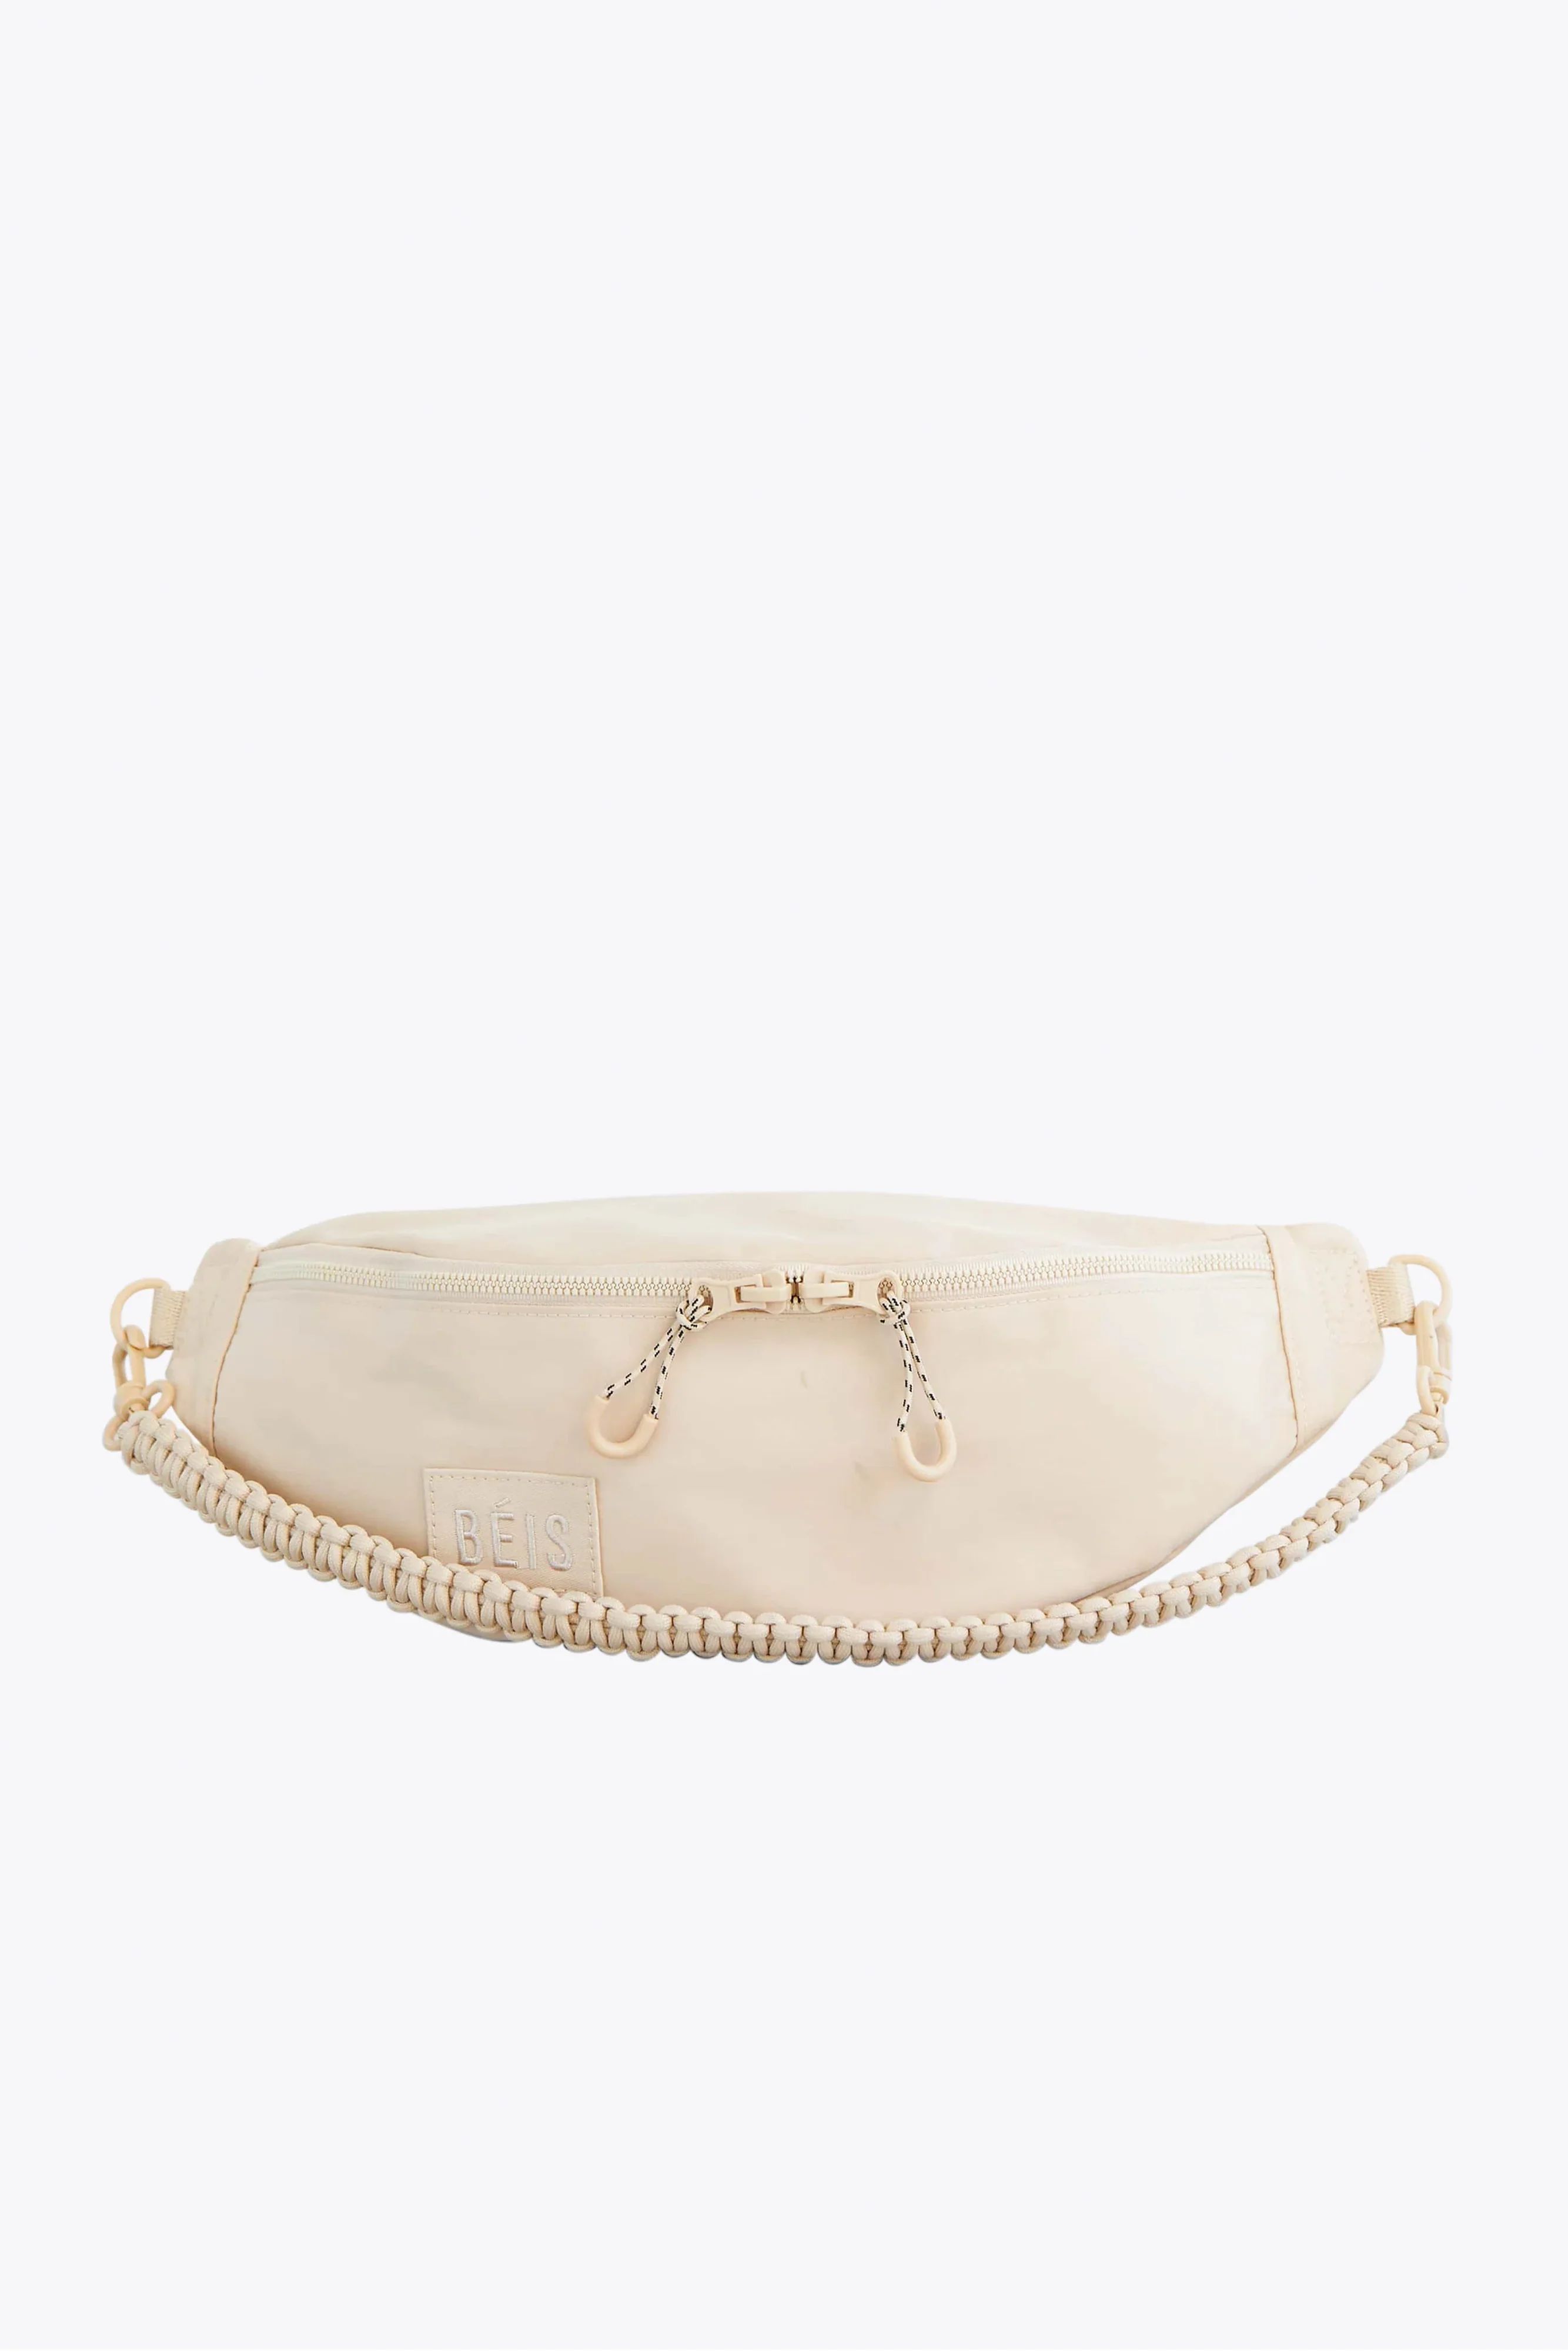 BÉIS 'The Sport Pack' in Beige - Athletic Fanny Pack For Sports | BÉIS Travel